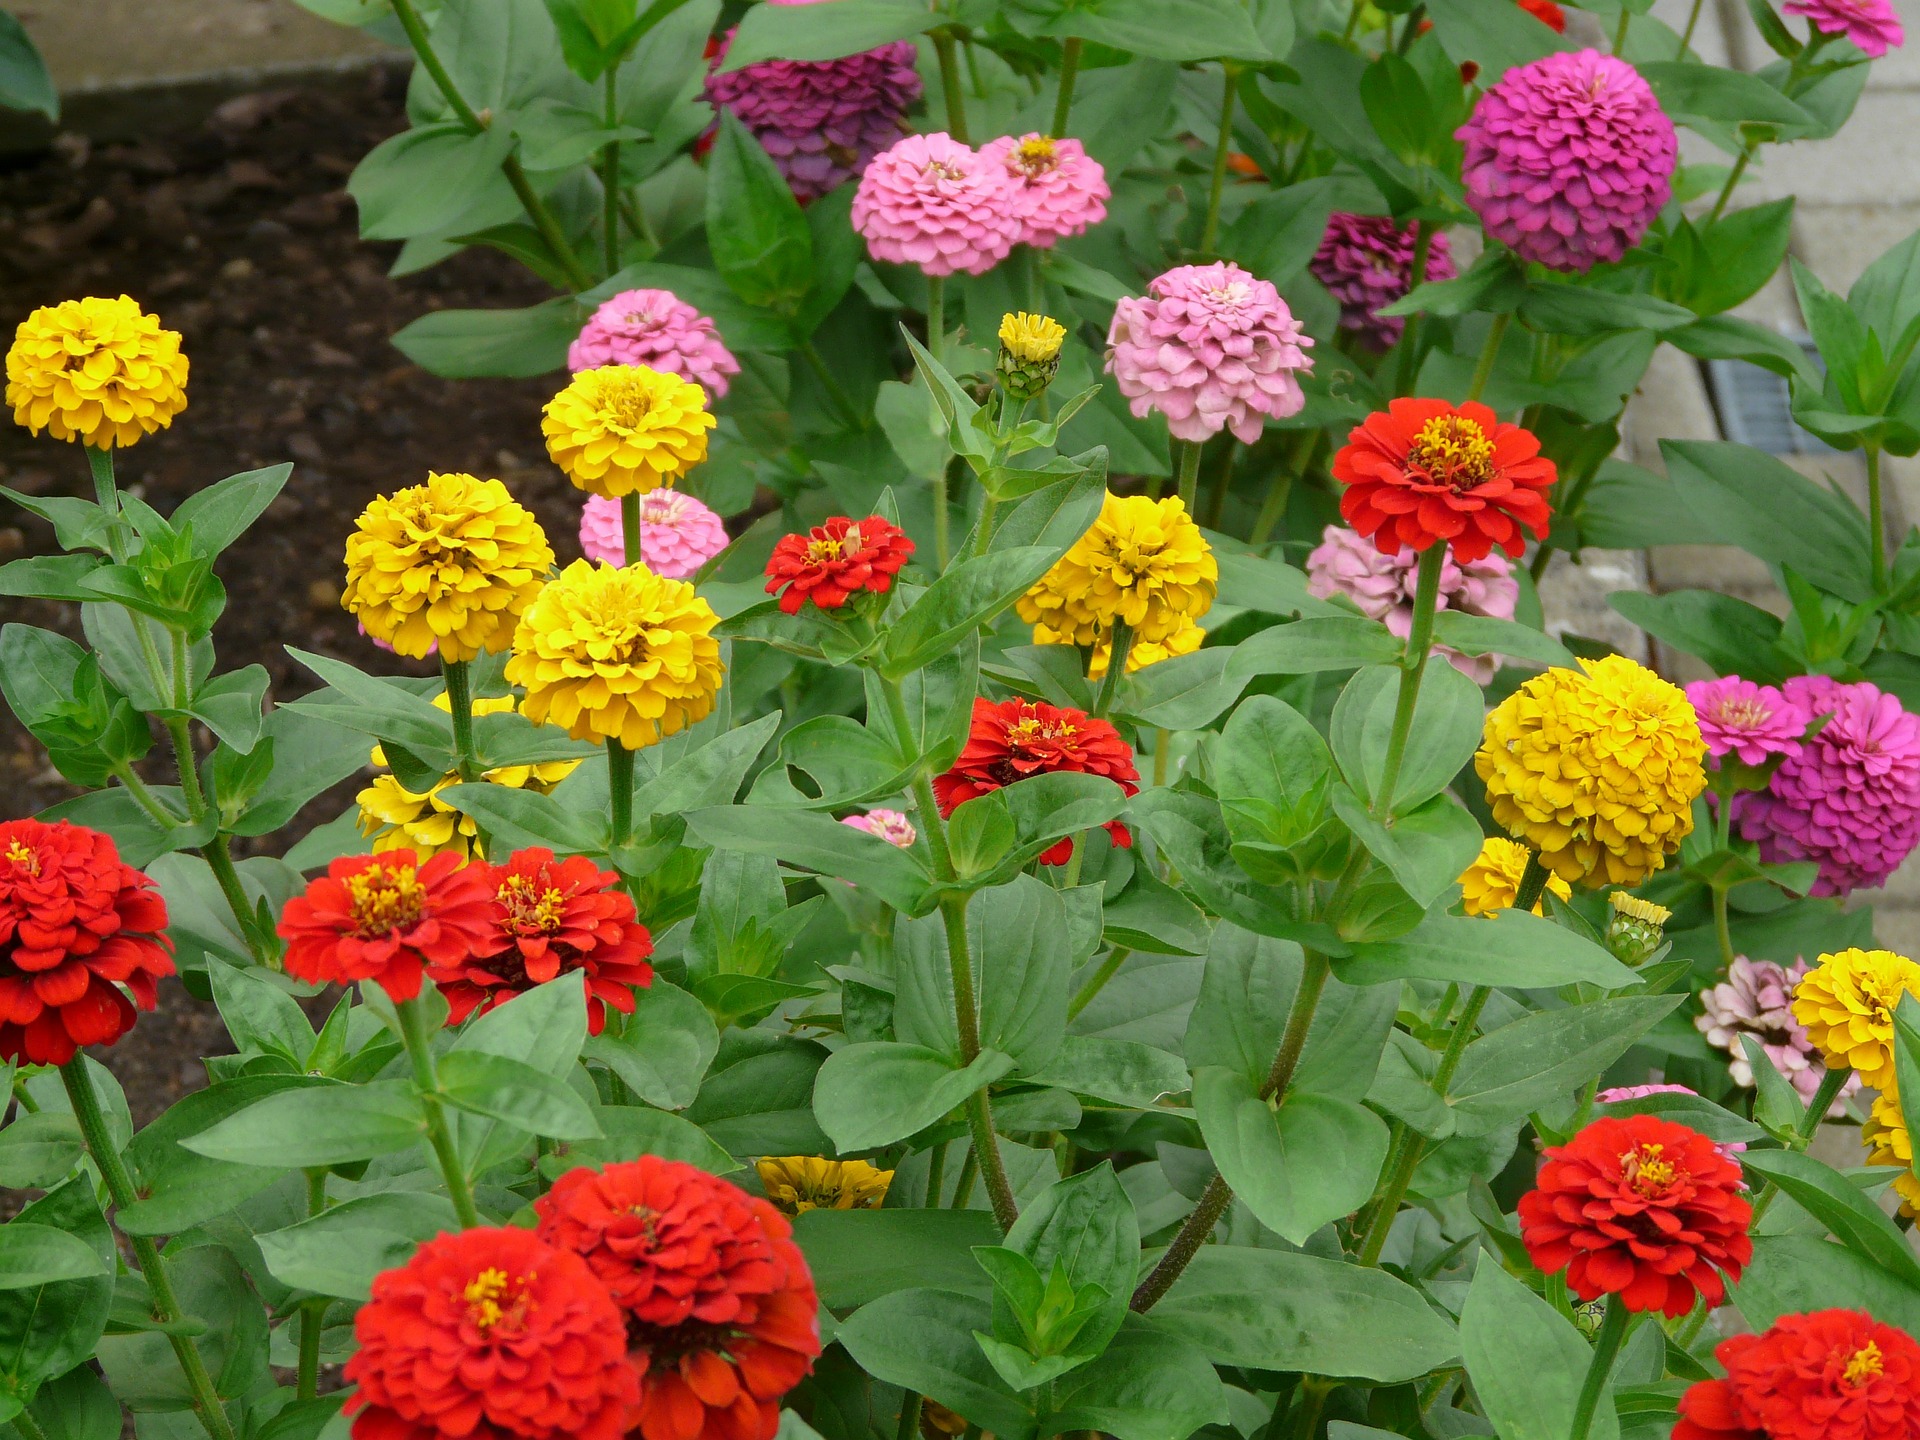 Zinnias: How to Plant, Grow, and Care for Zinnia Flowers | The Old ...